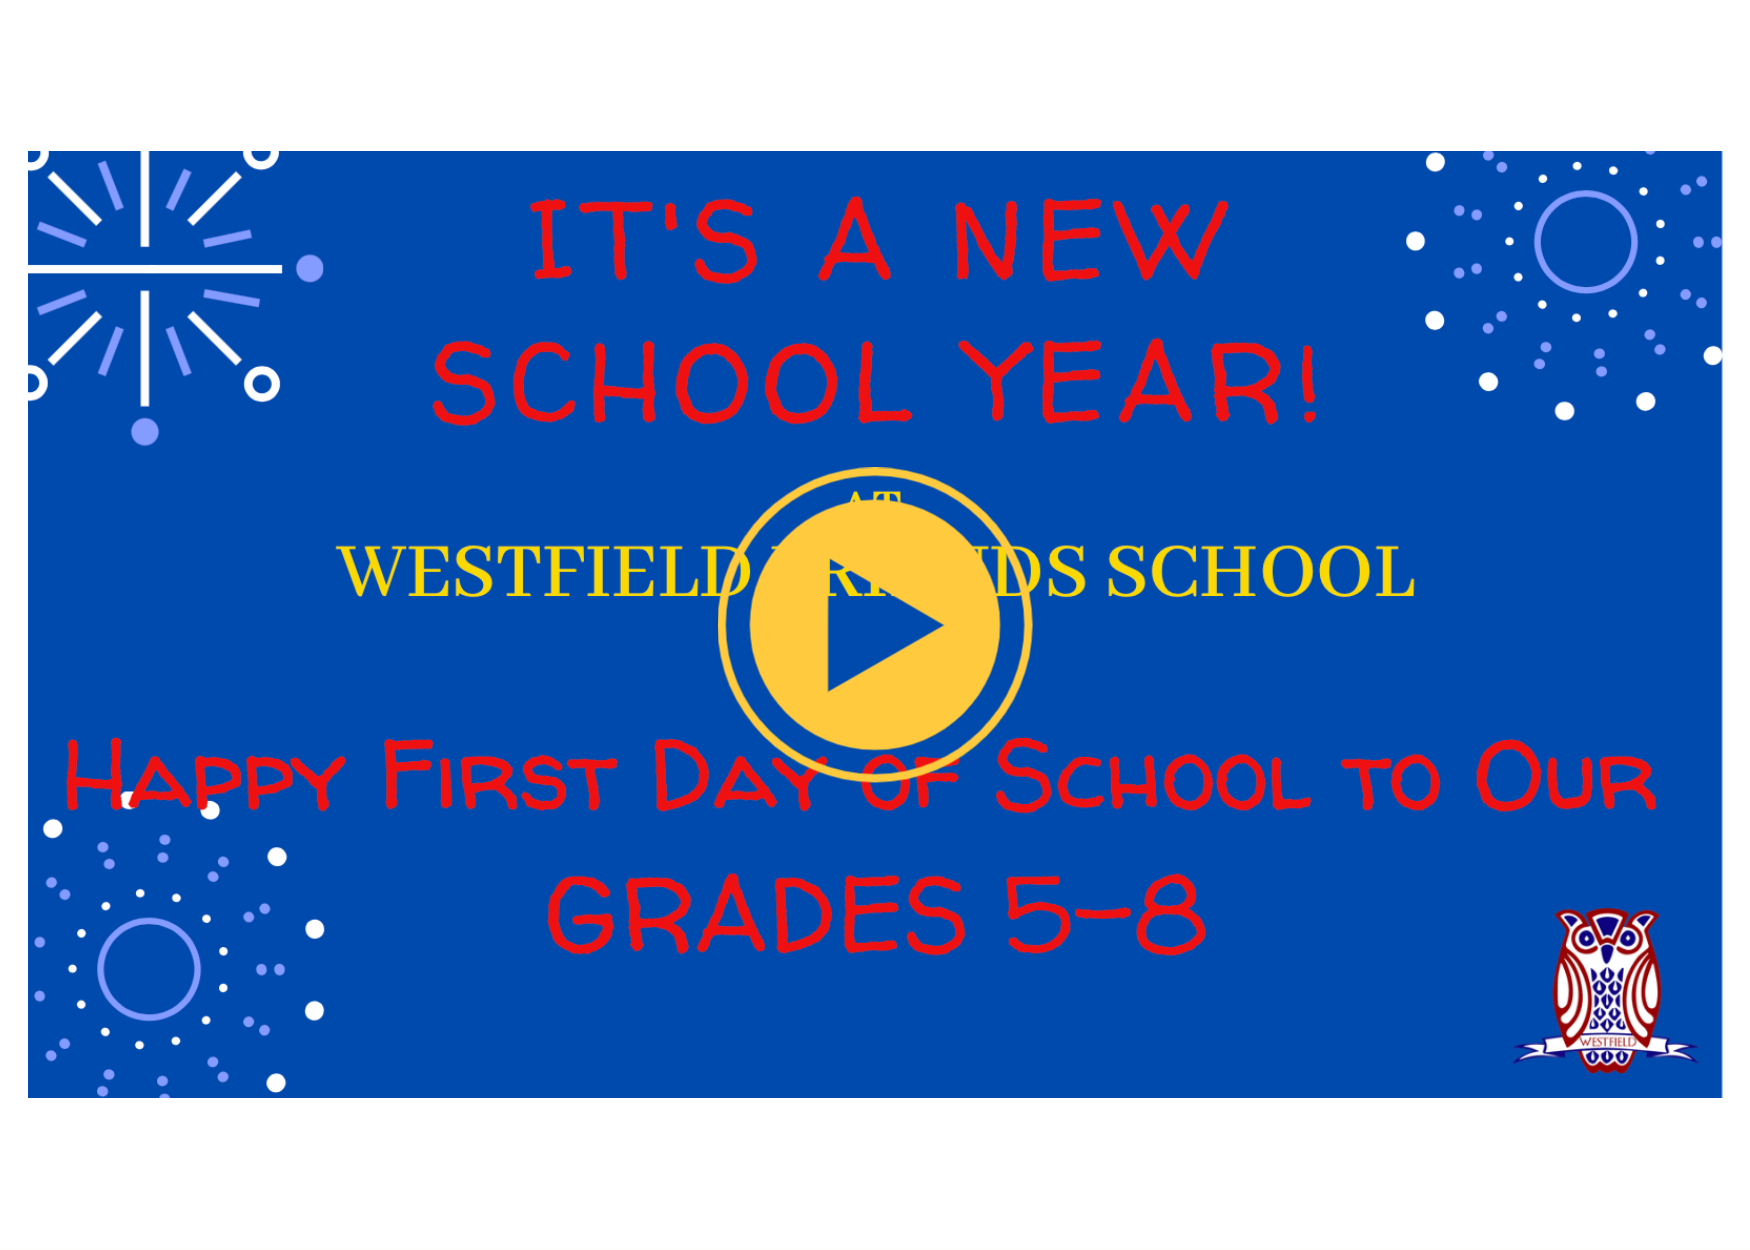 Grades 5-8 First Day video